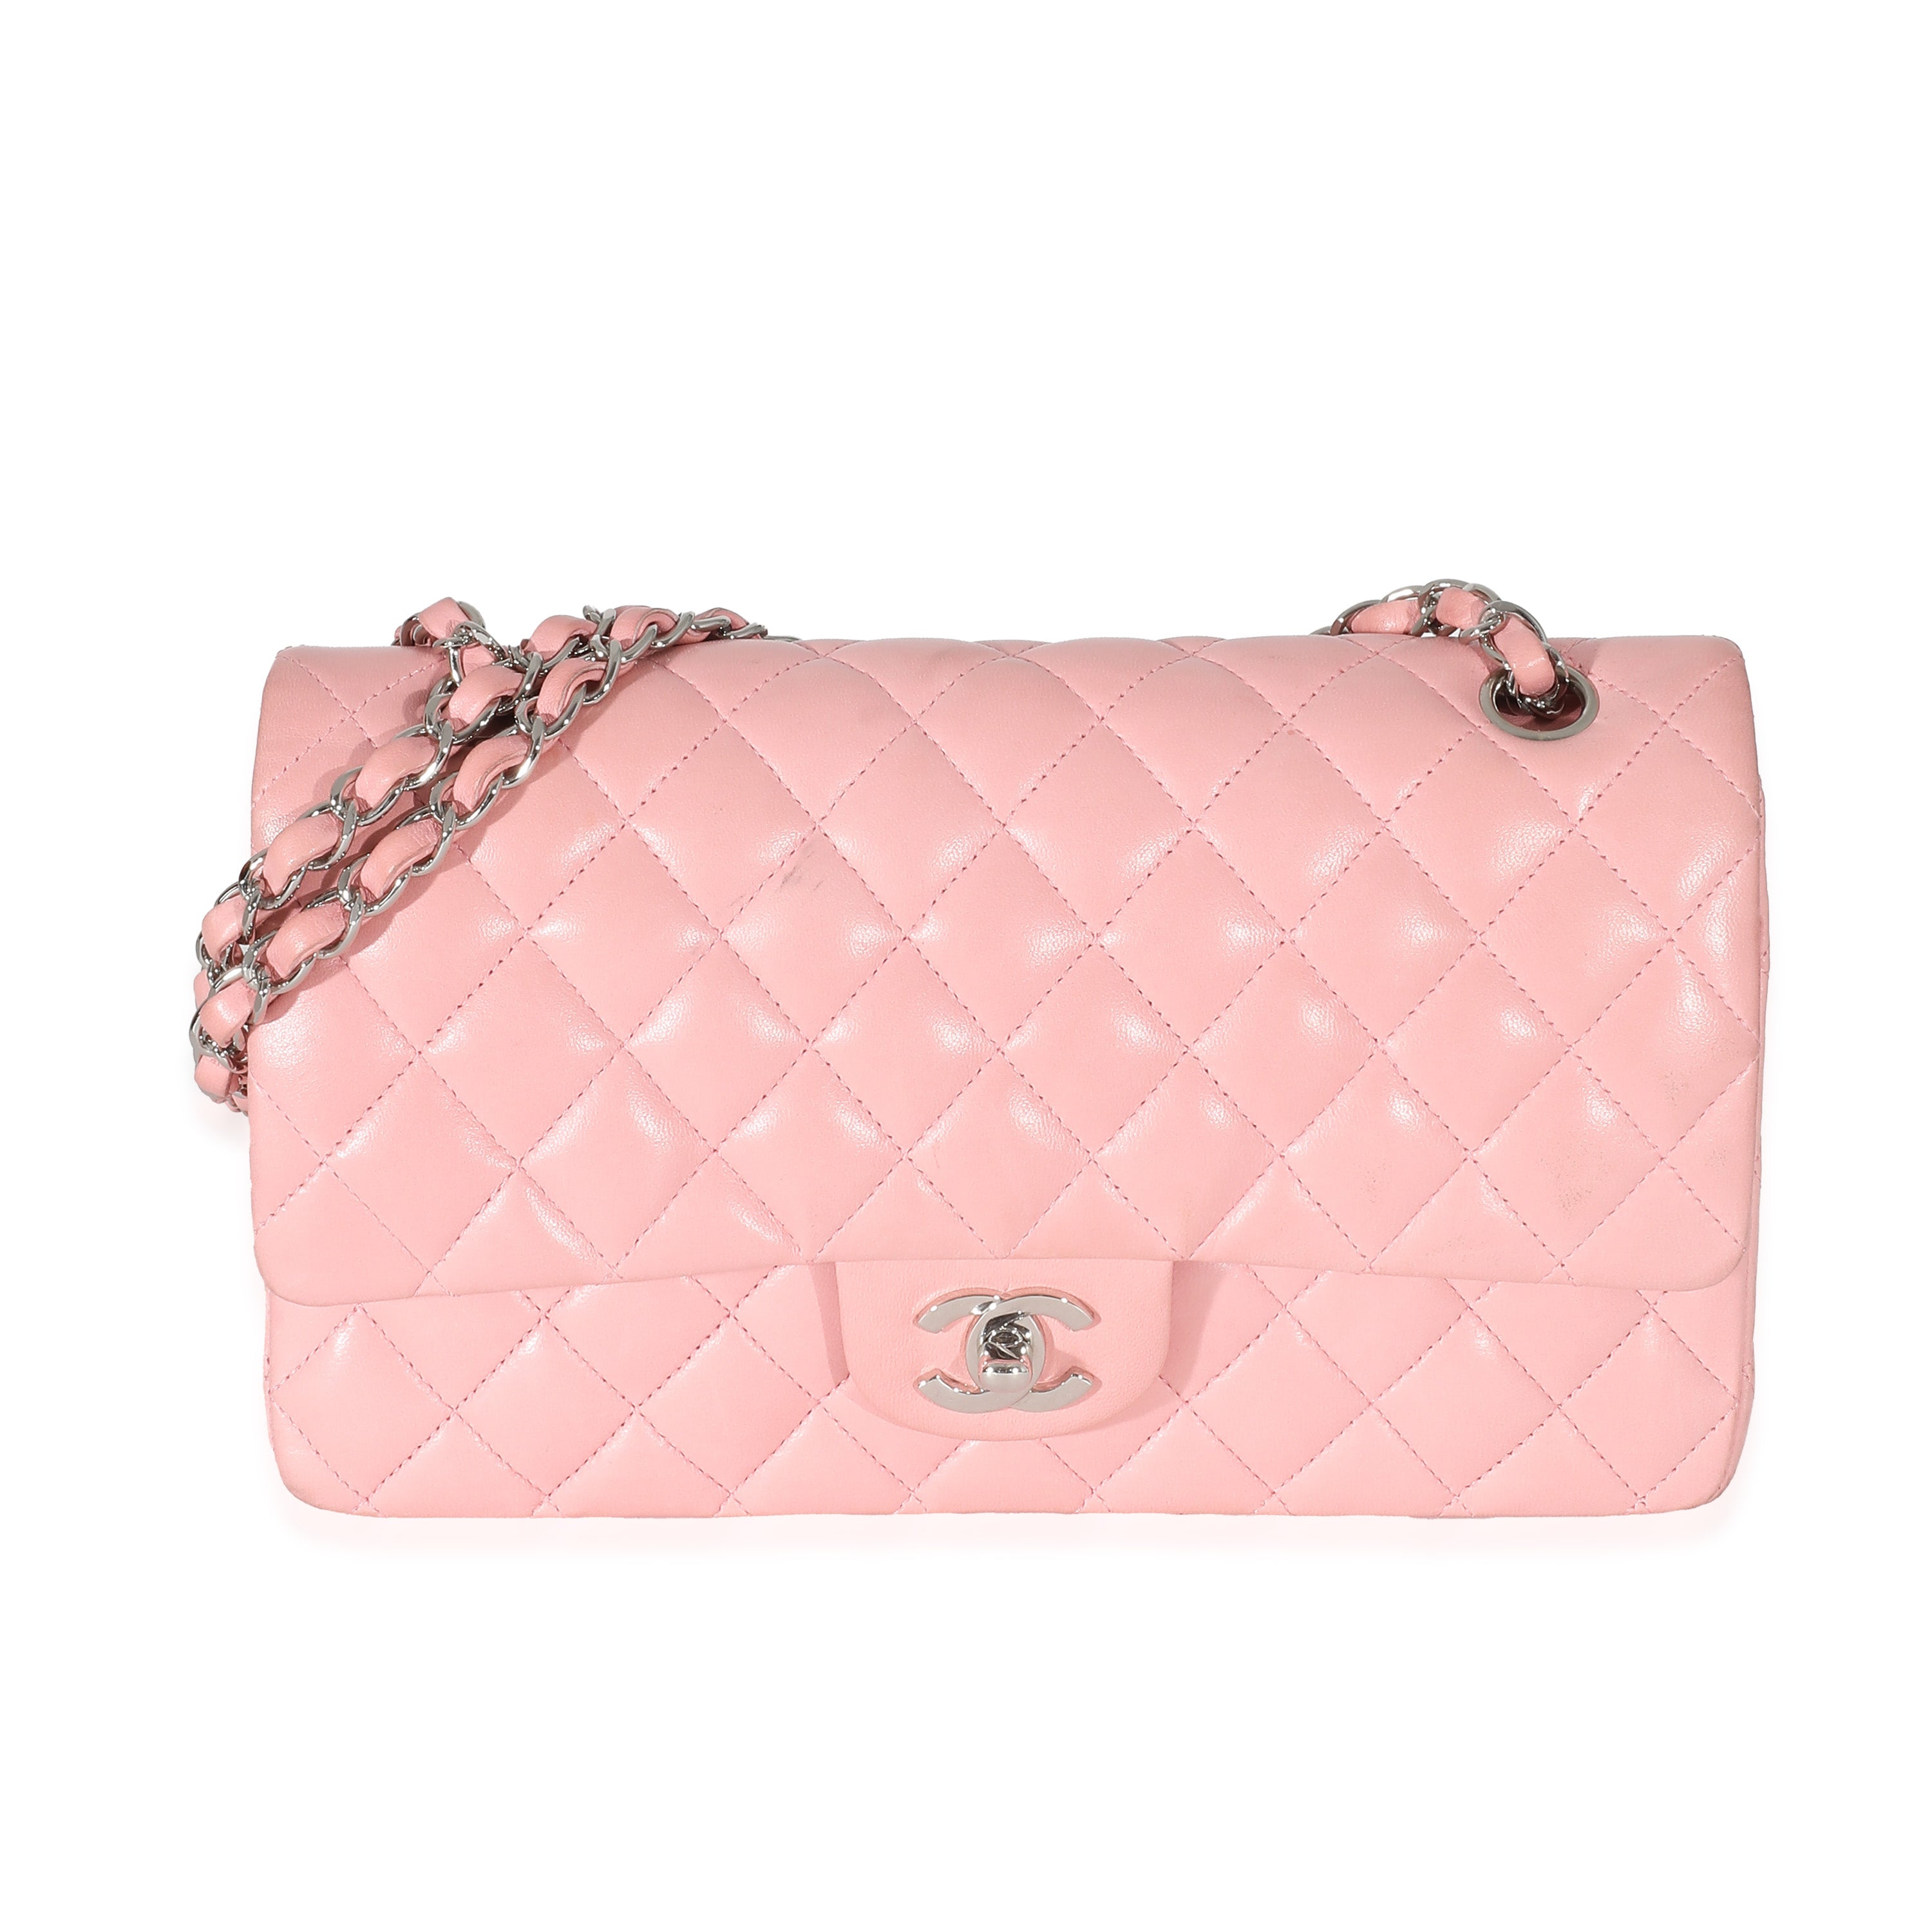 Chanel Beige Quilted Leather Medium Chic Pearls Flap Bag Chanel